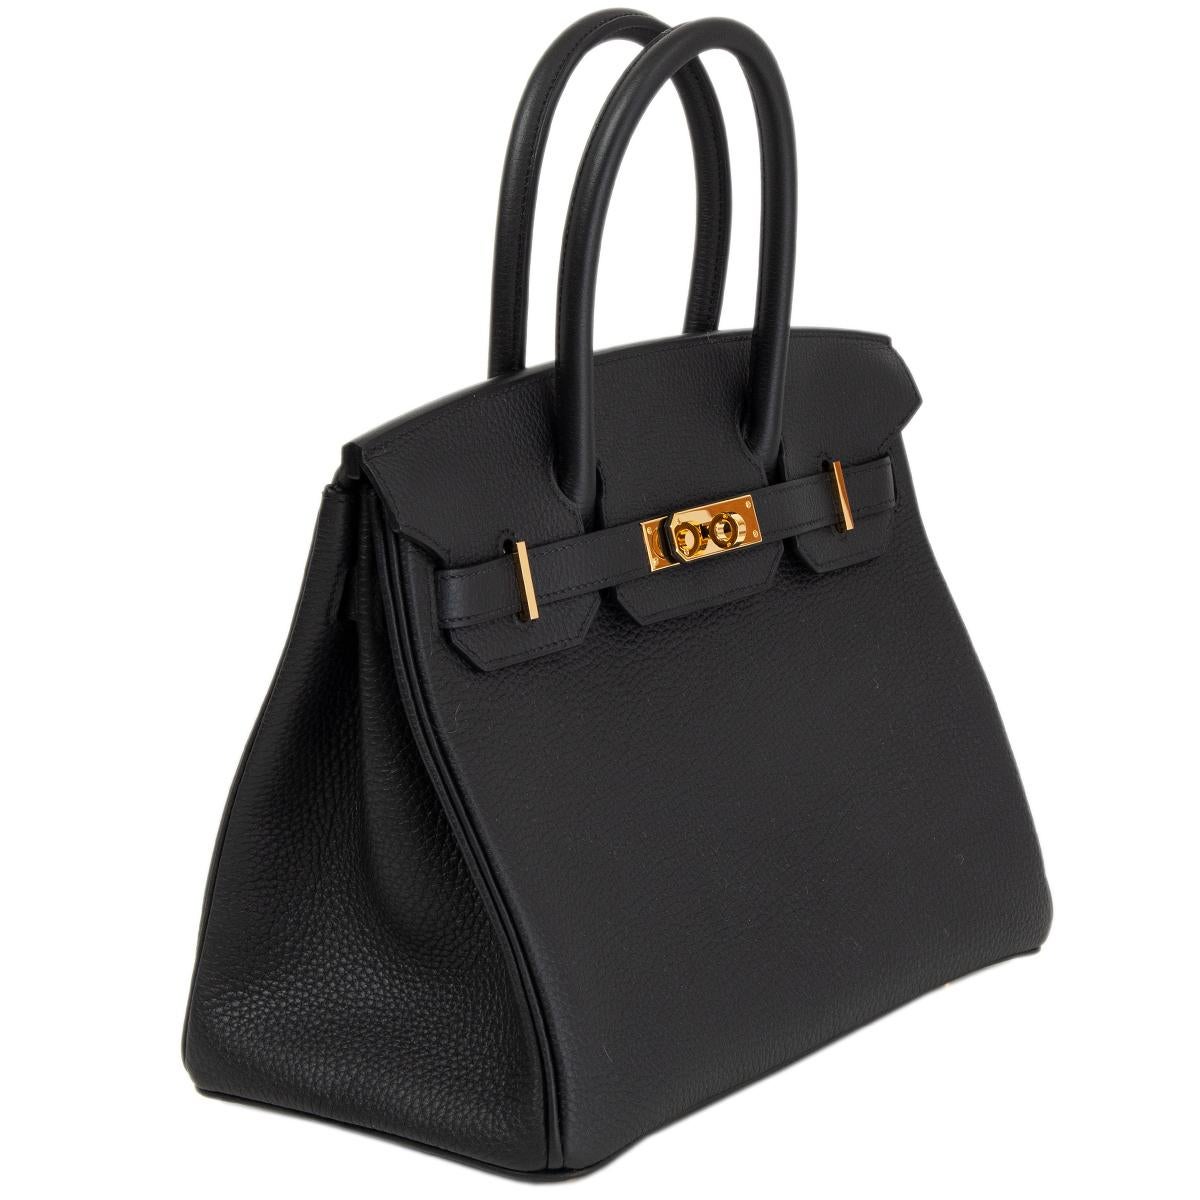 100% authentic Hermès Birkin 30 bag in Noir (black) Togo leather with gold-plated hardware. Lined in Chevre (goat skin) with an open pocket against the front and zipper pocket against the back. Brand new. Comes with full